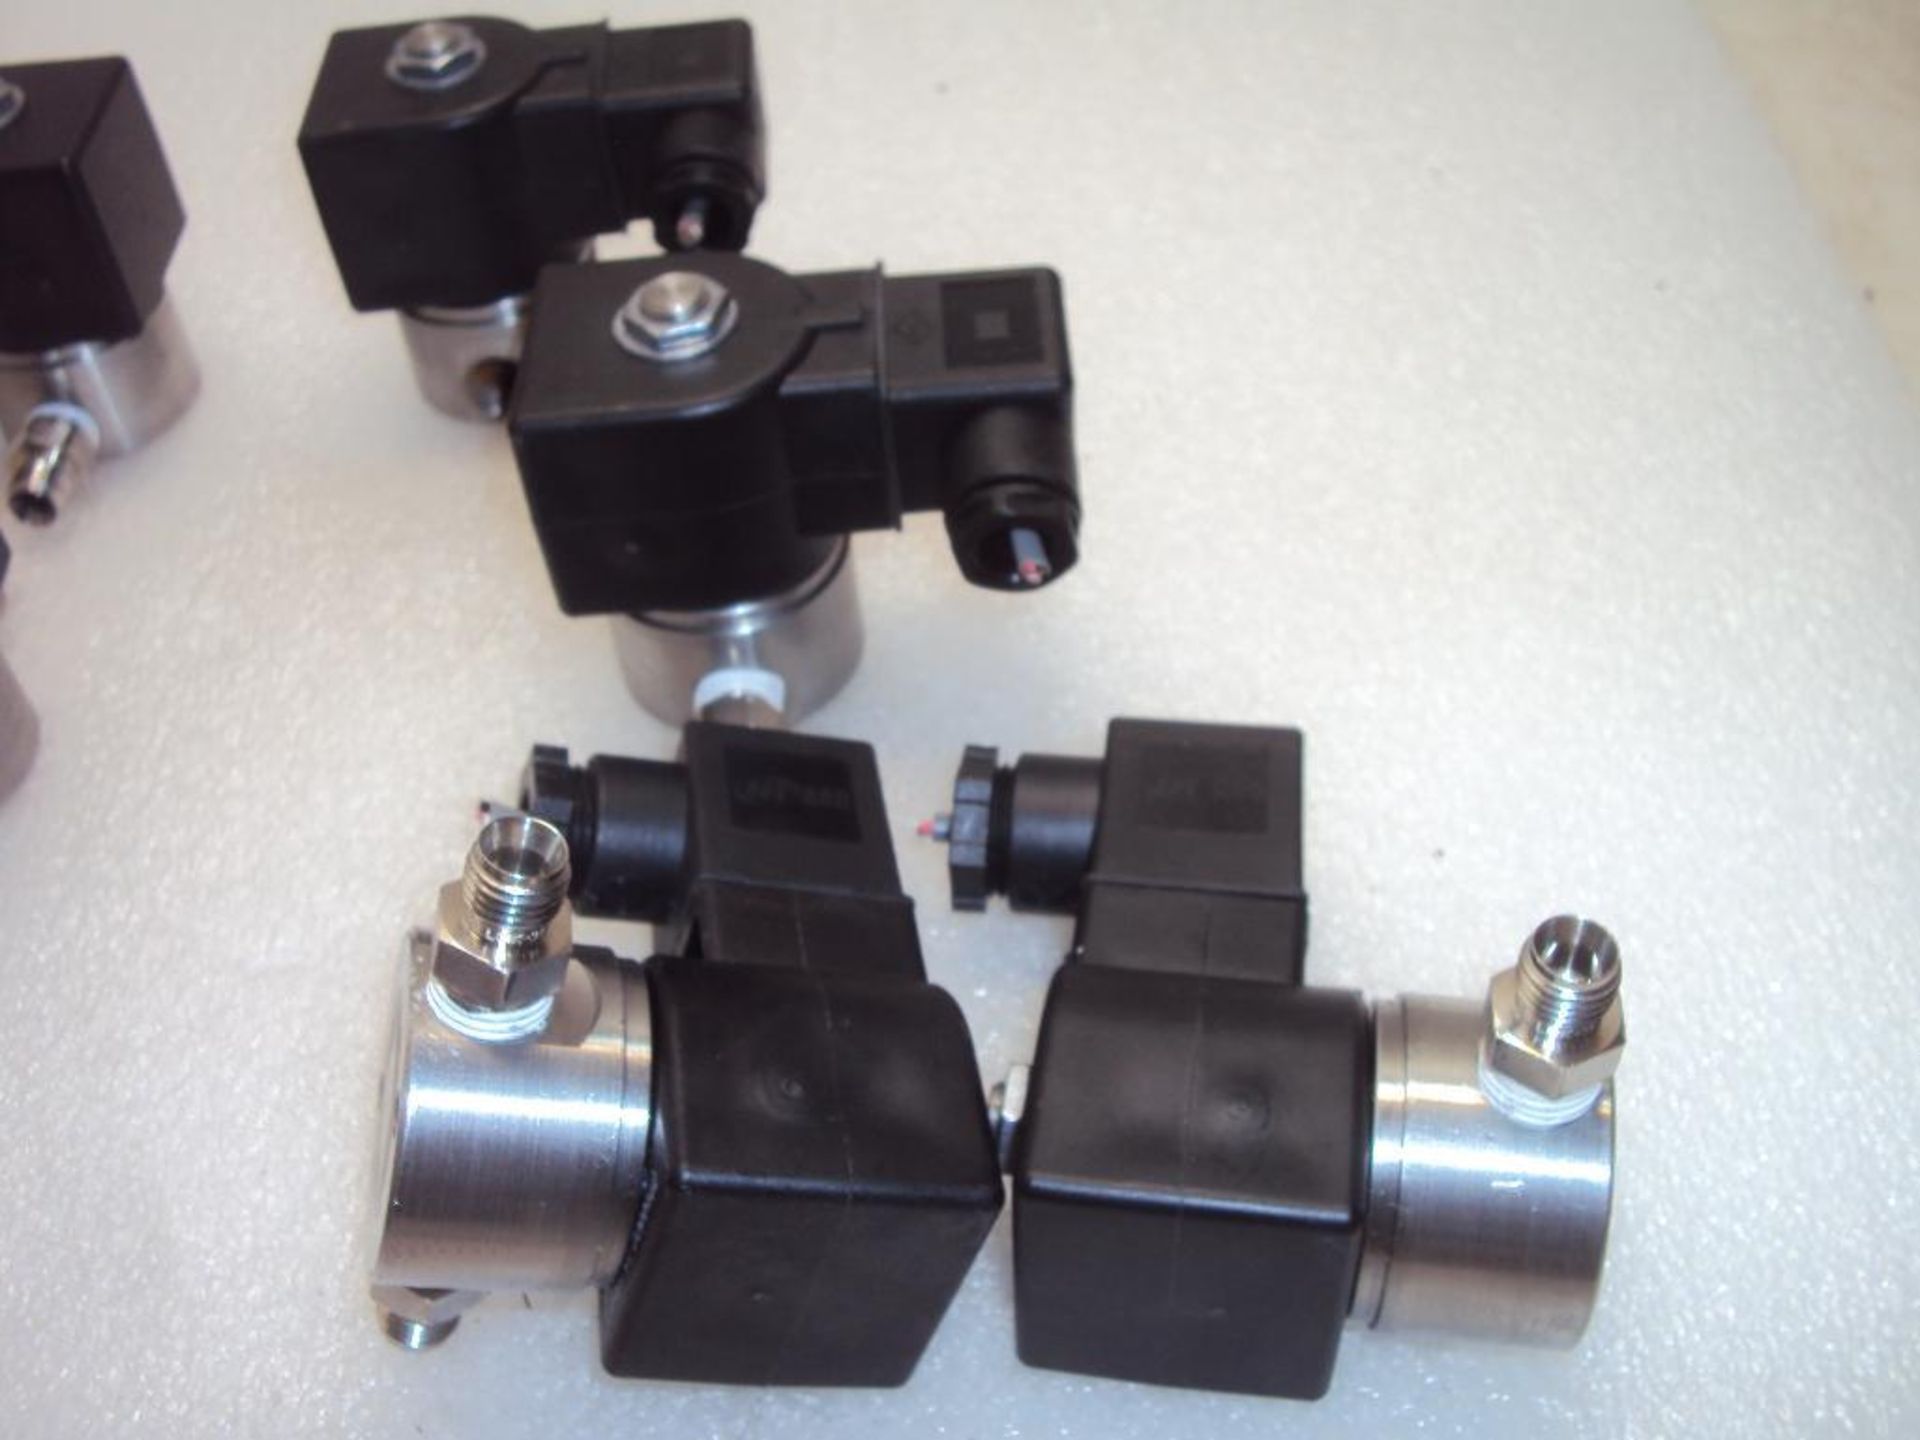 Parker Stainless Steel Solenoid 2 Way Valves - Image 3 of 3